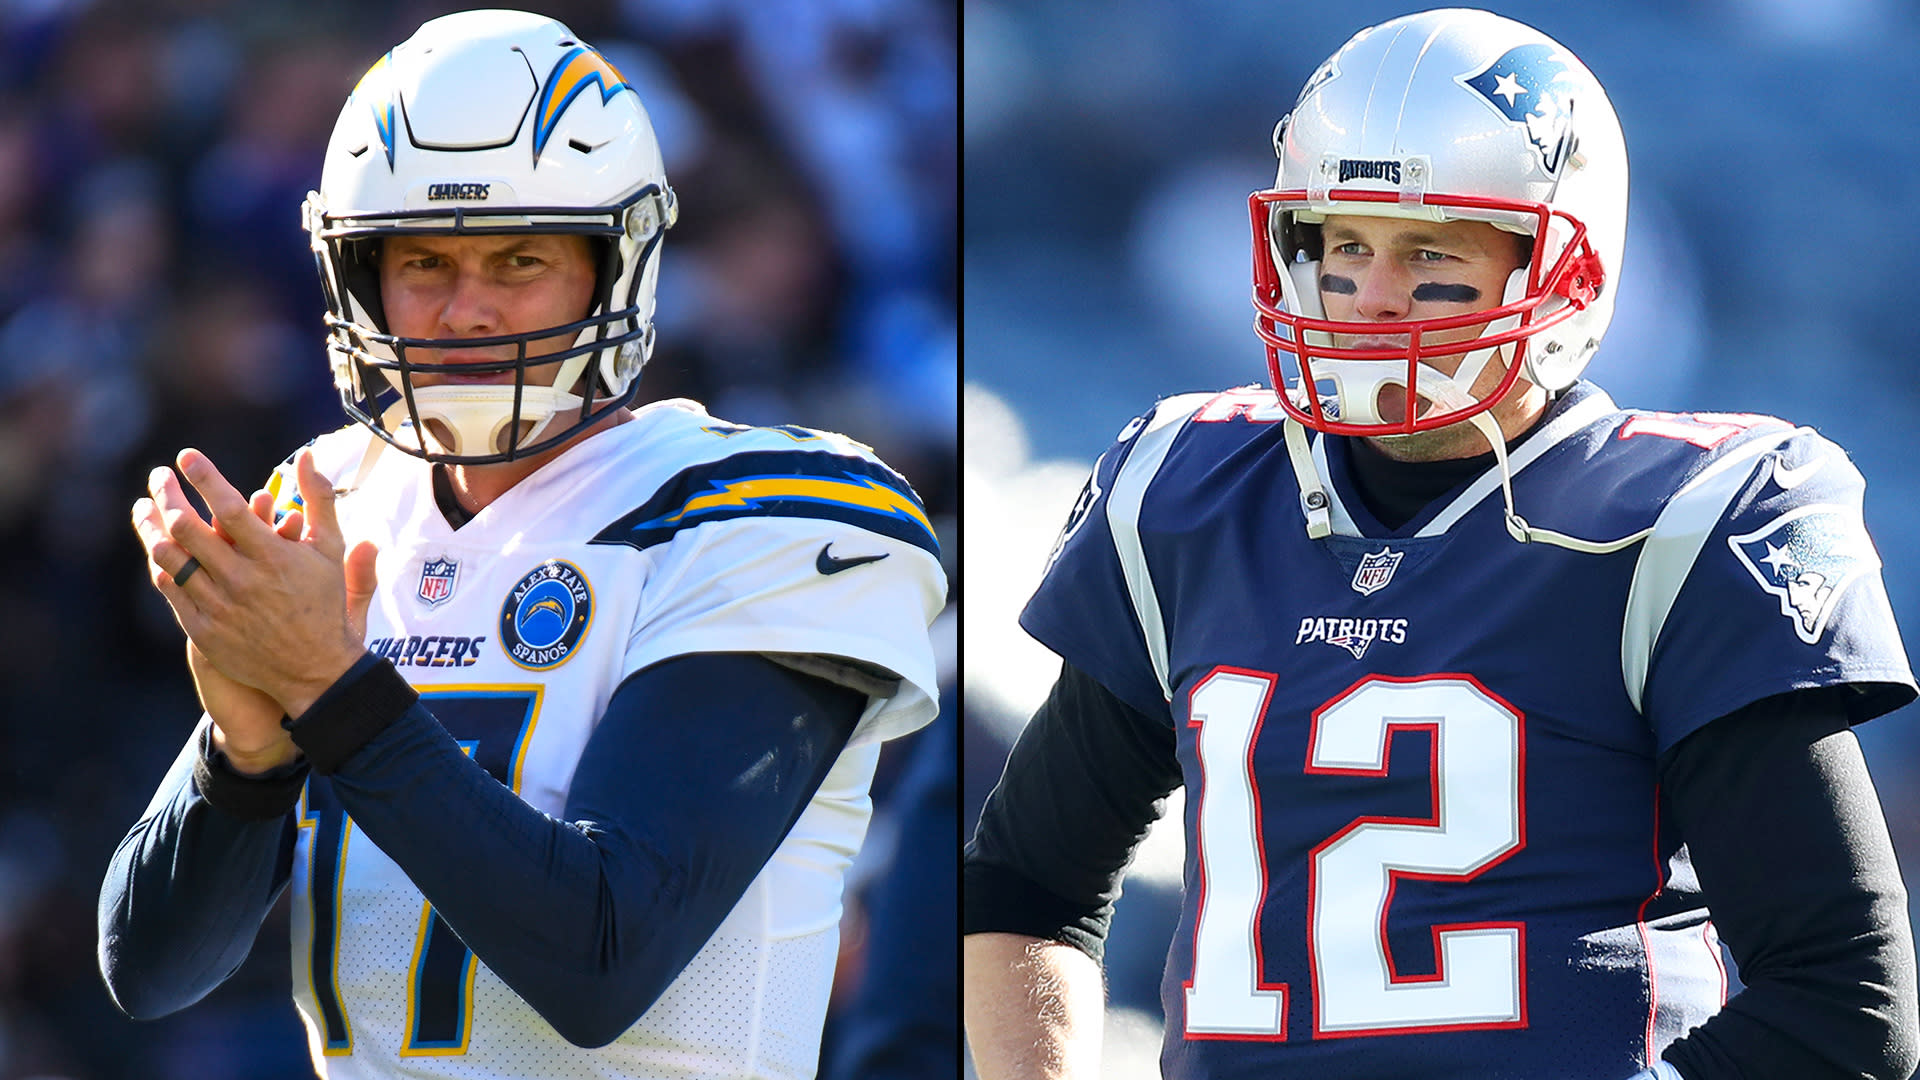 ESPN says Philip Rivers is Hall of Fame worthy over Eli Manning